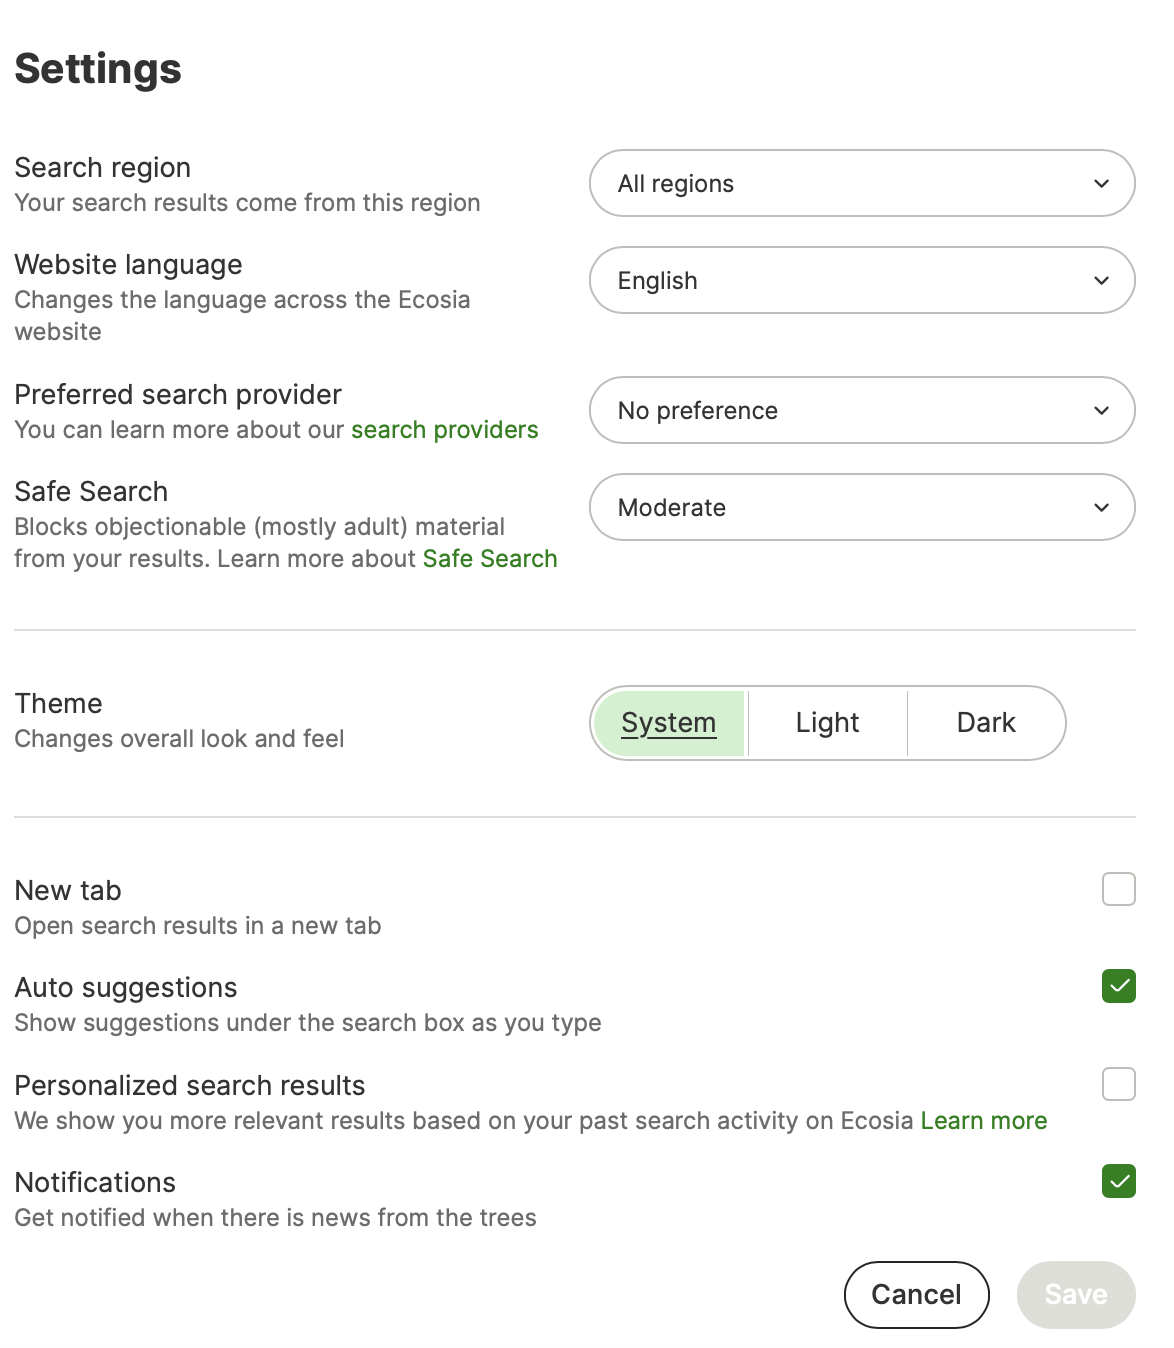 Image showing all Ecosia settings.